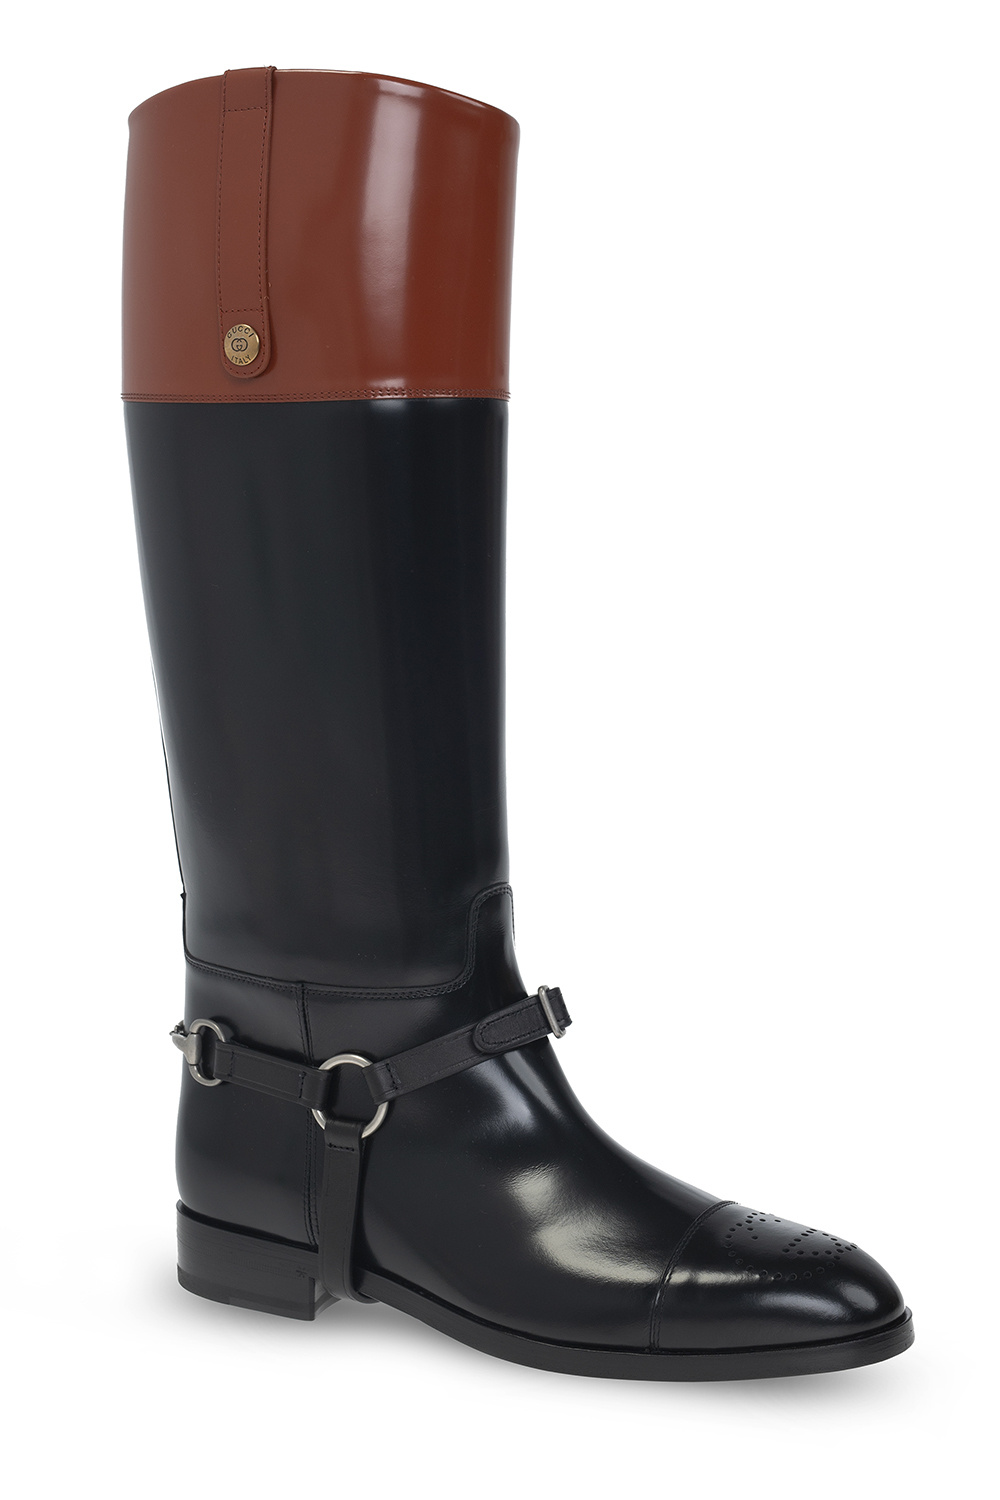 gucci logo Leather boots